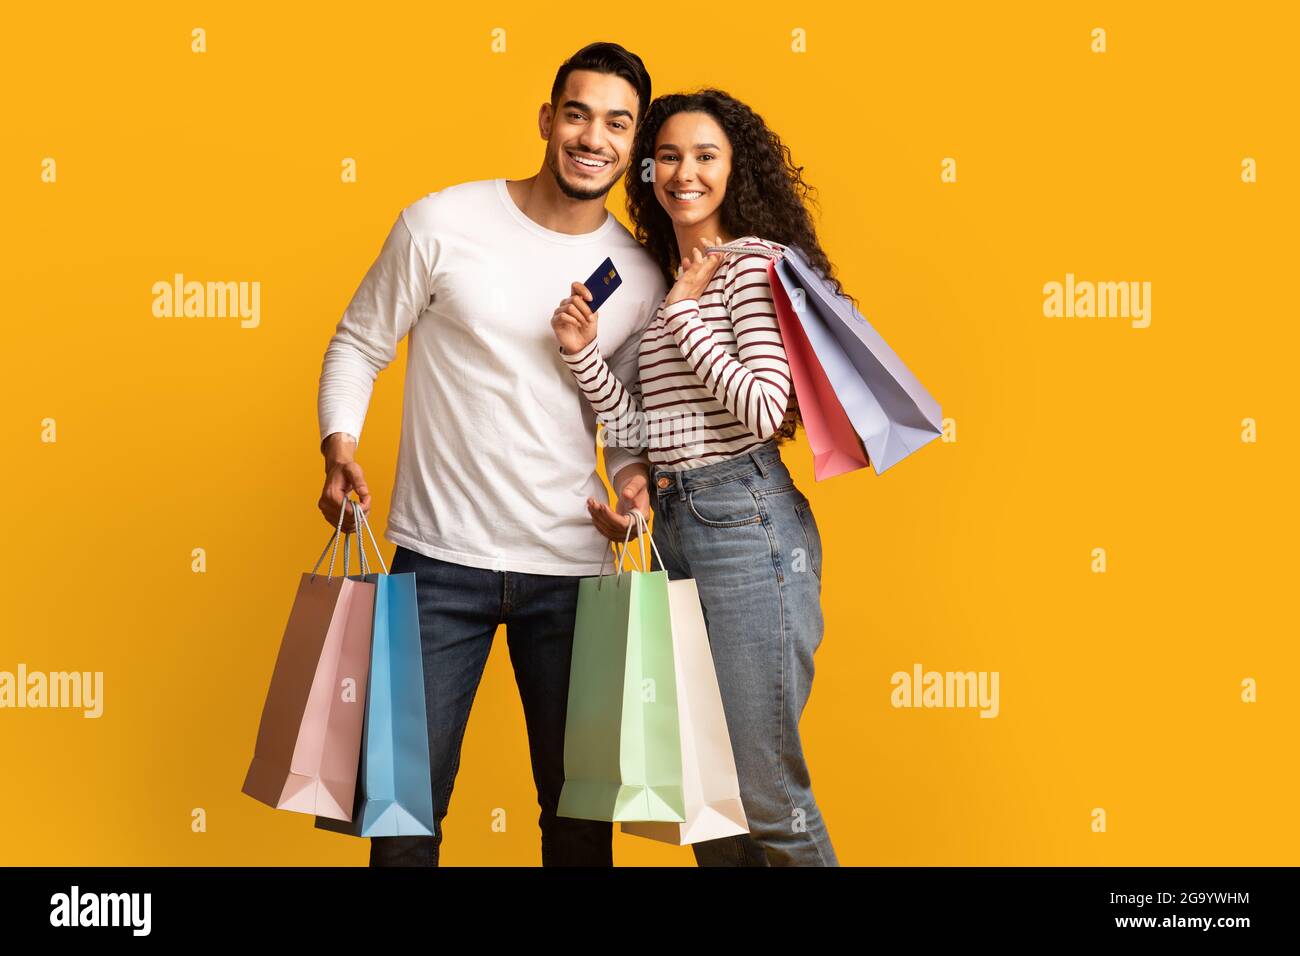 Cheerful Young Arab Couple Posing With Credit Card And Bright Shopping Bags Stock Photo